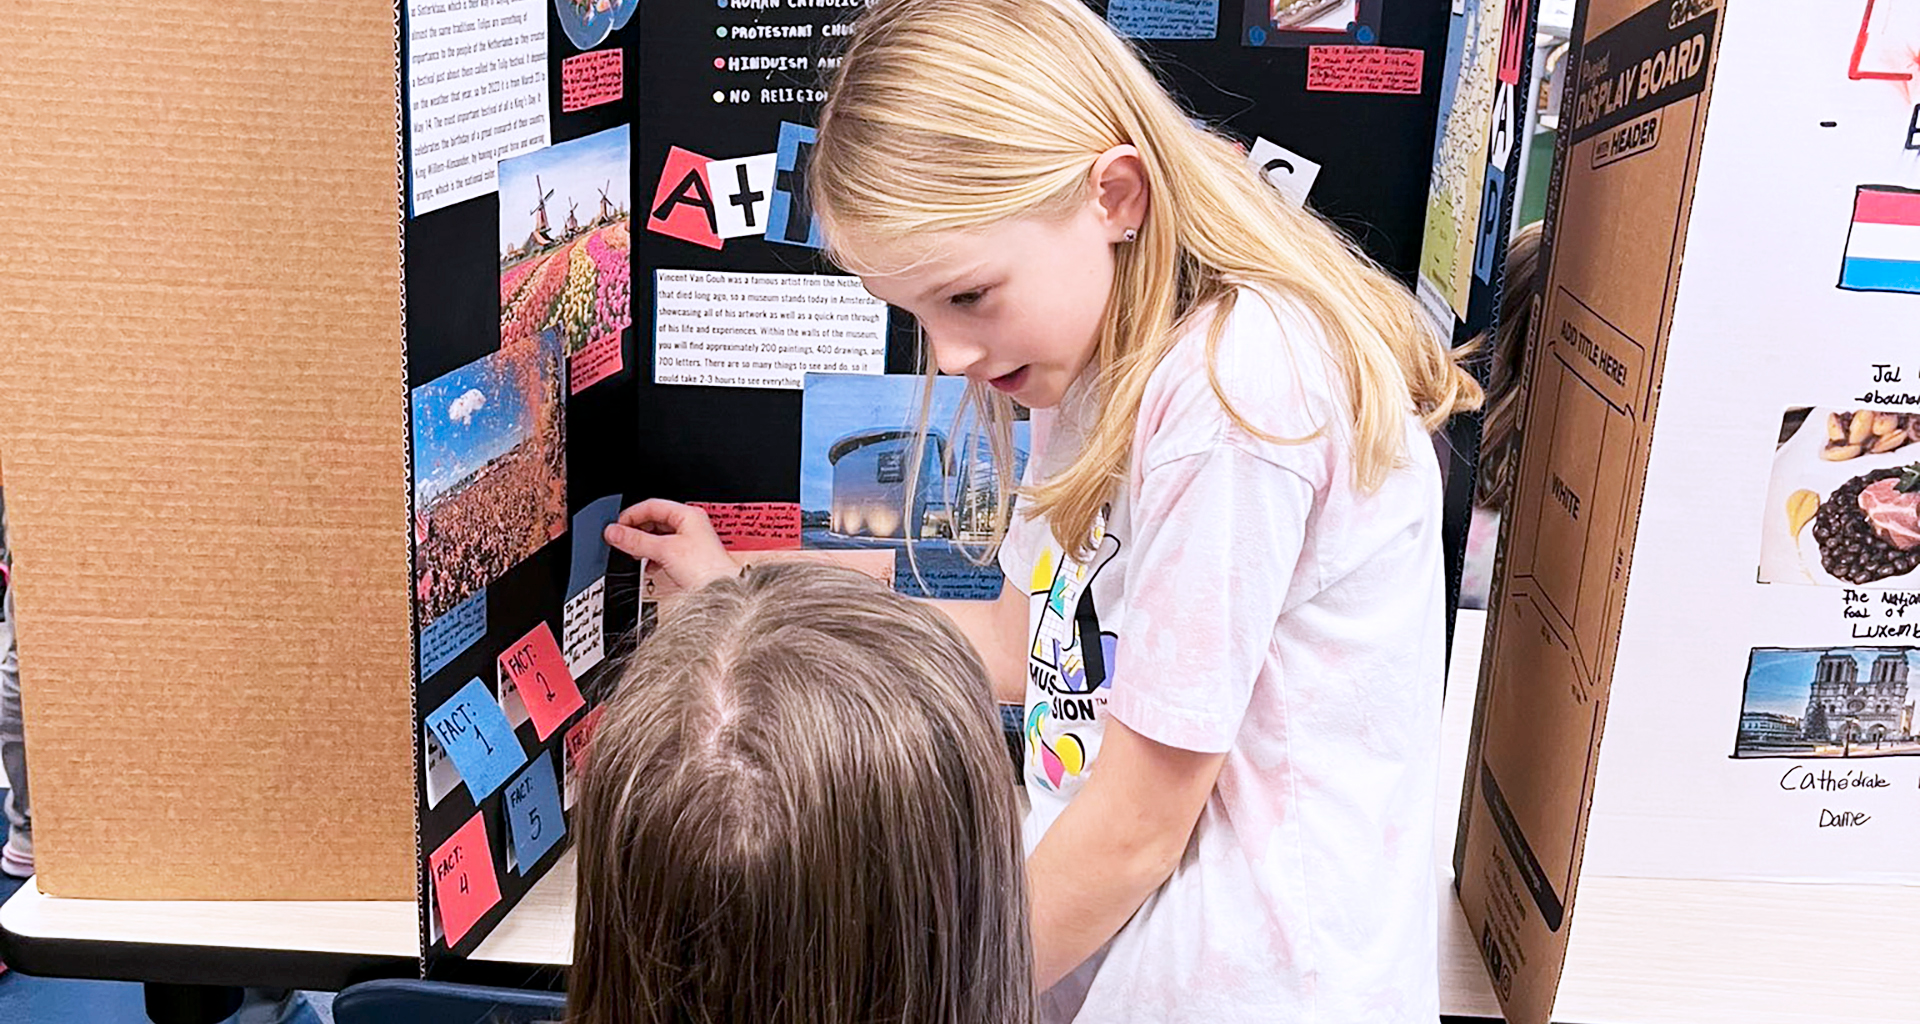 Two students looking at a poster together during a fair.